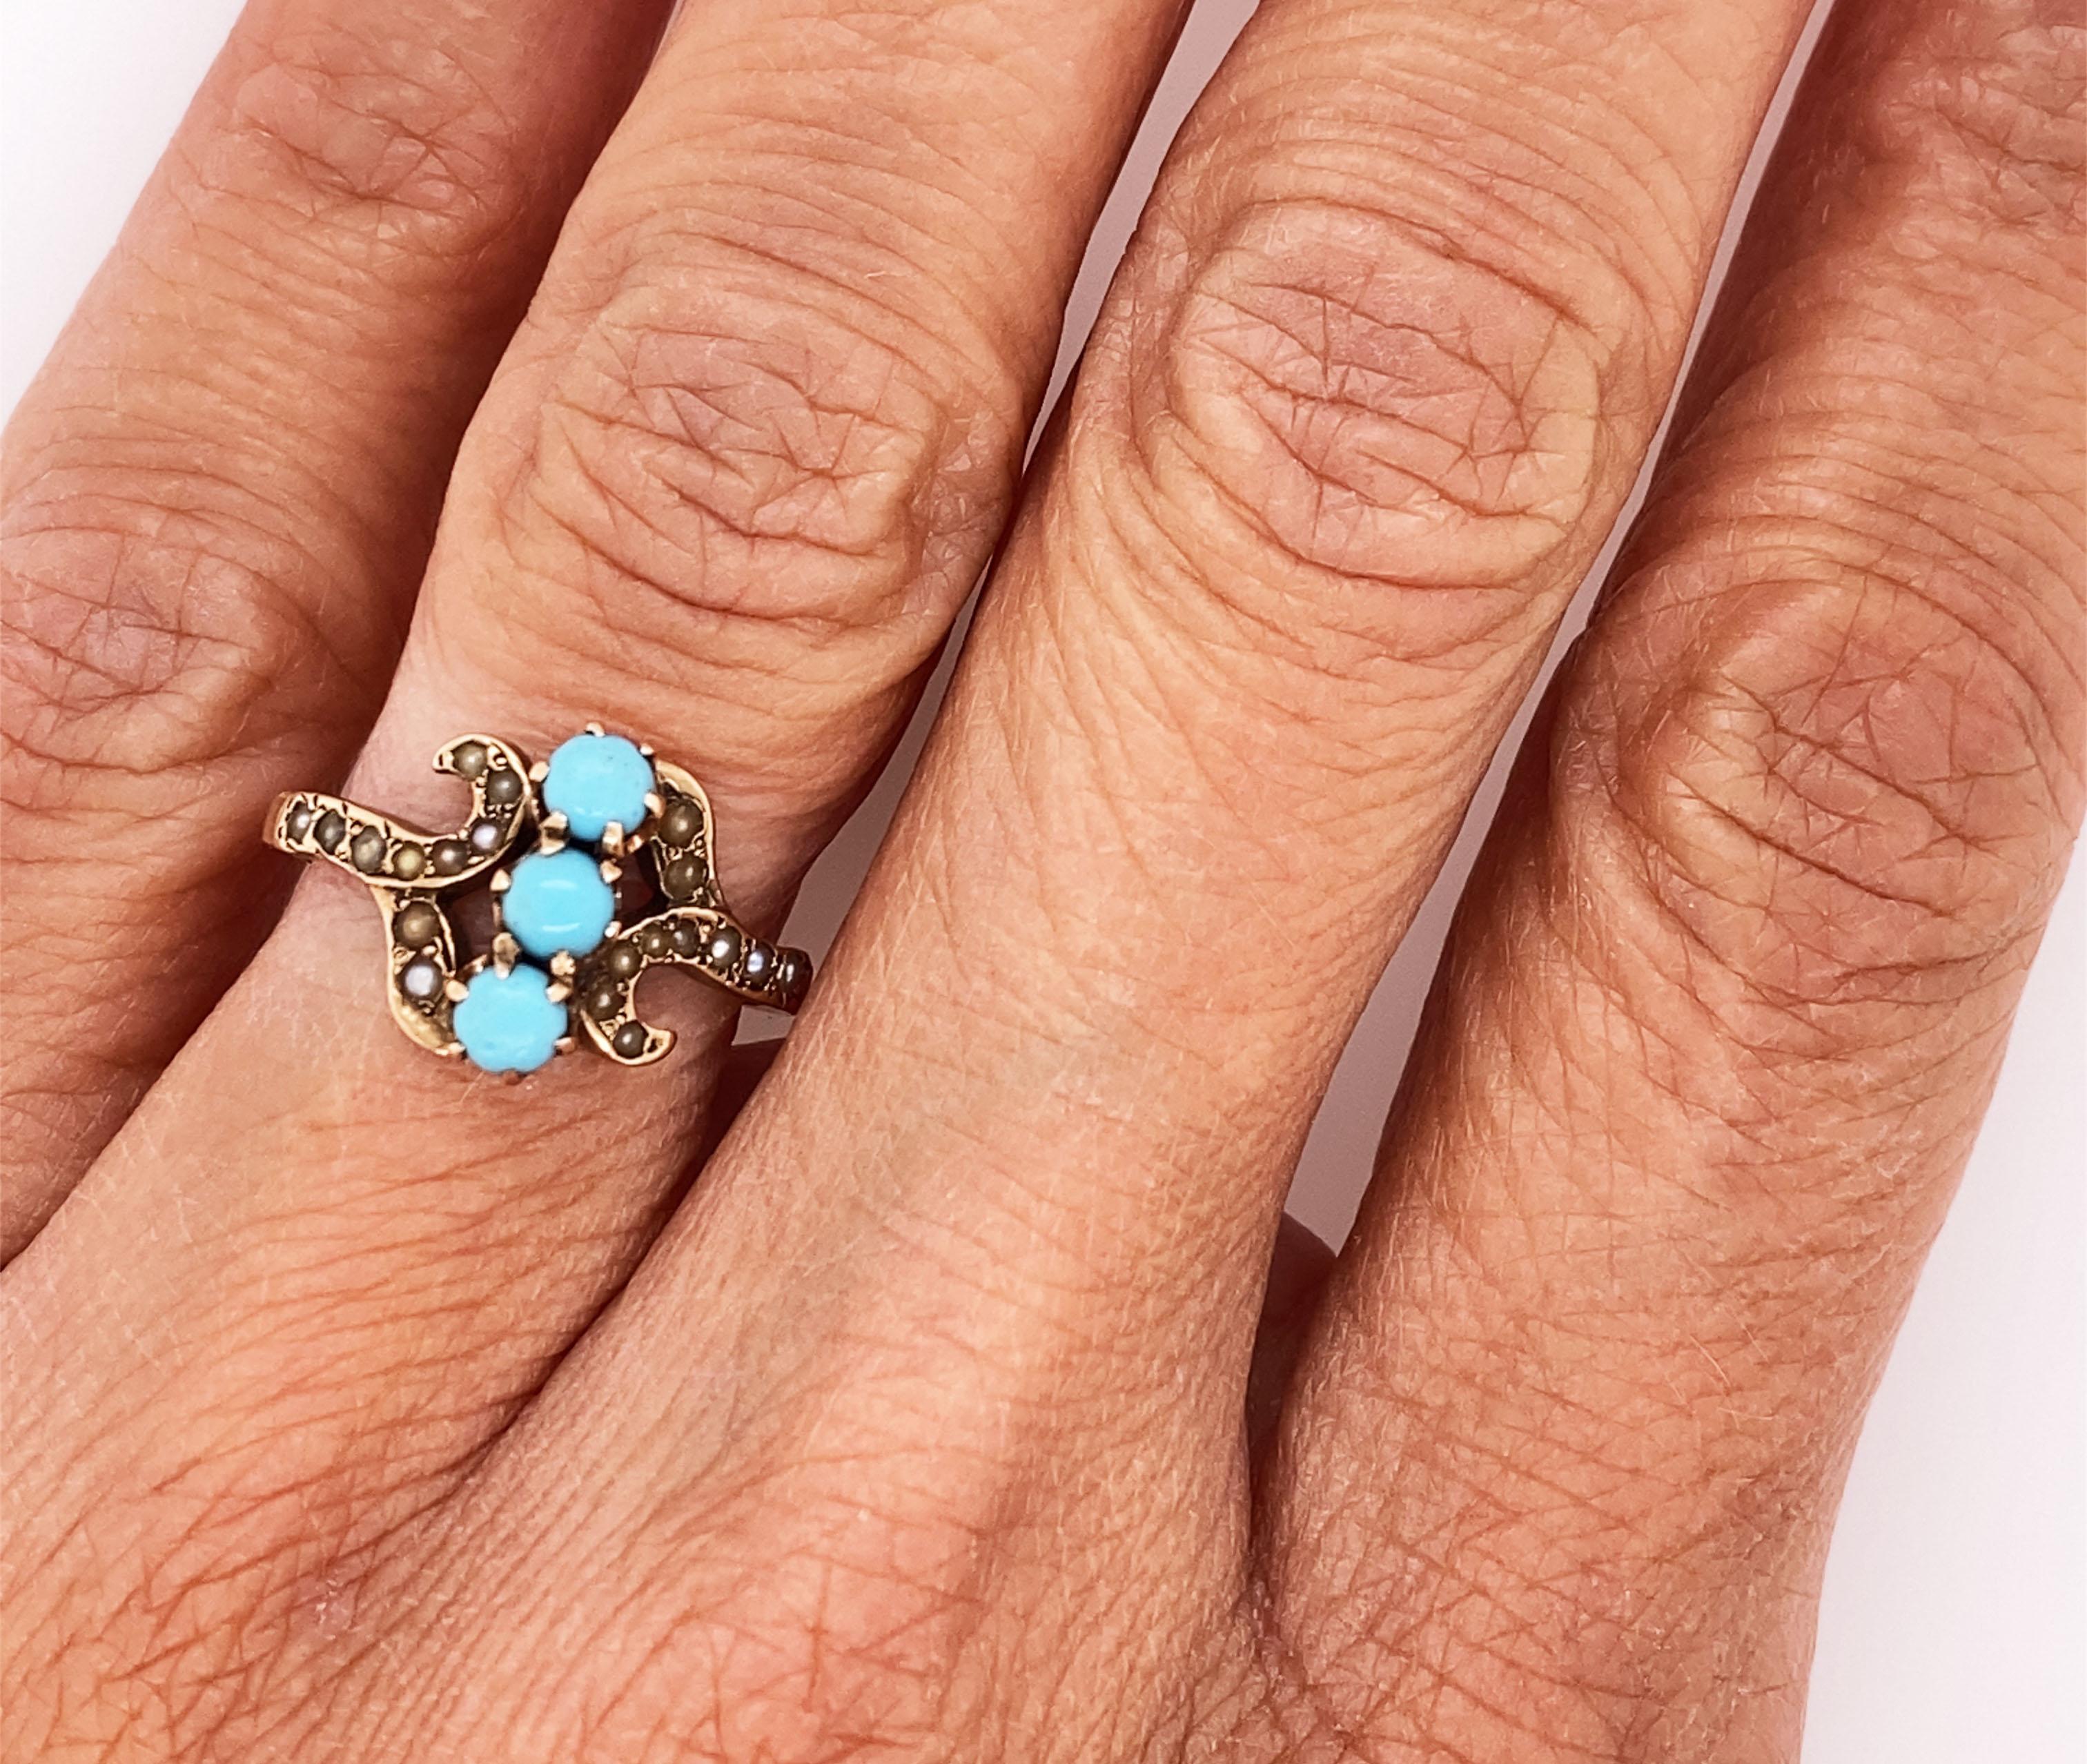 Women's Victorian Turquoise Ring Seed Pearls 3 Stone Original 1860's -1880's Antique 14K